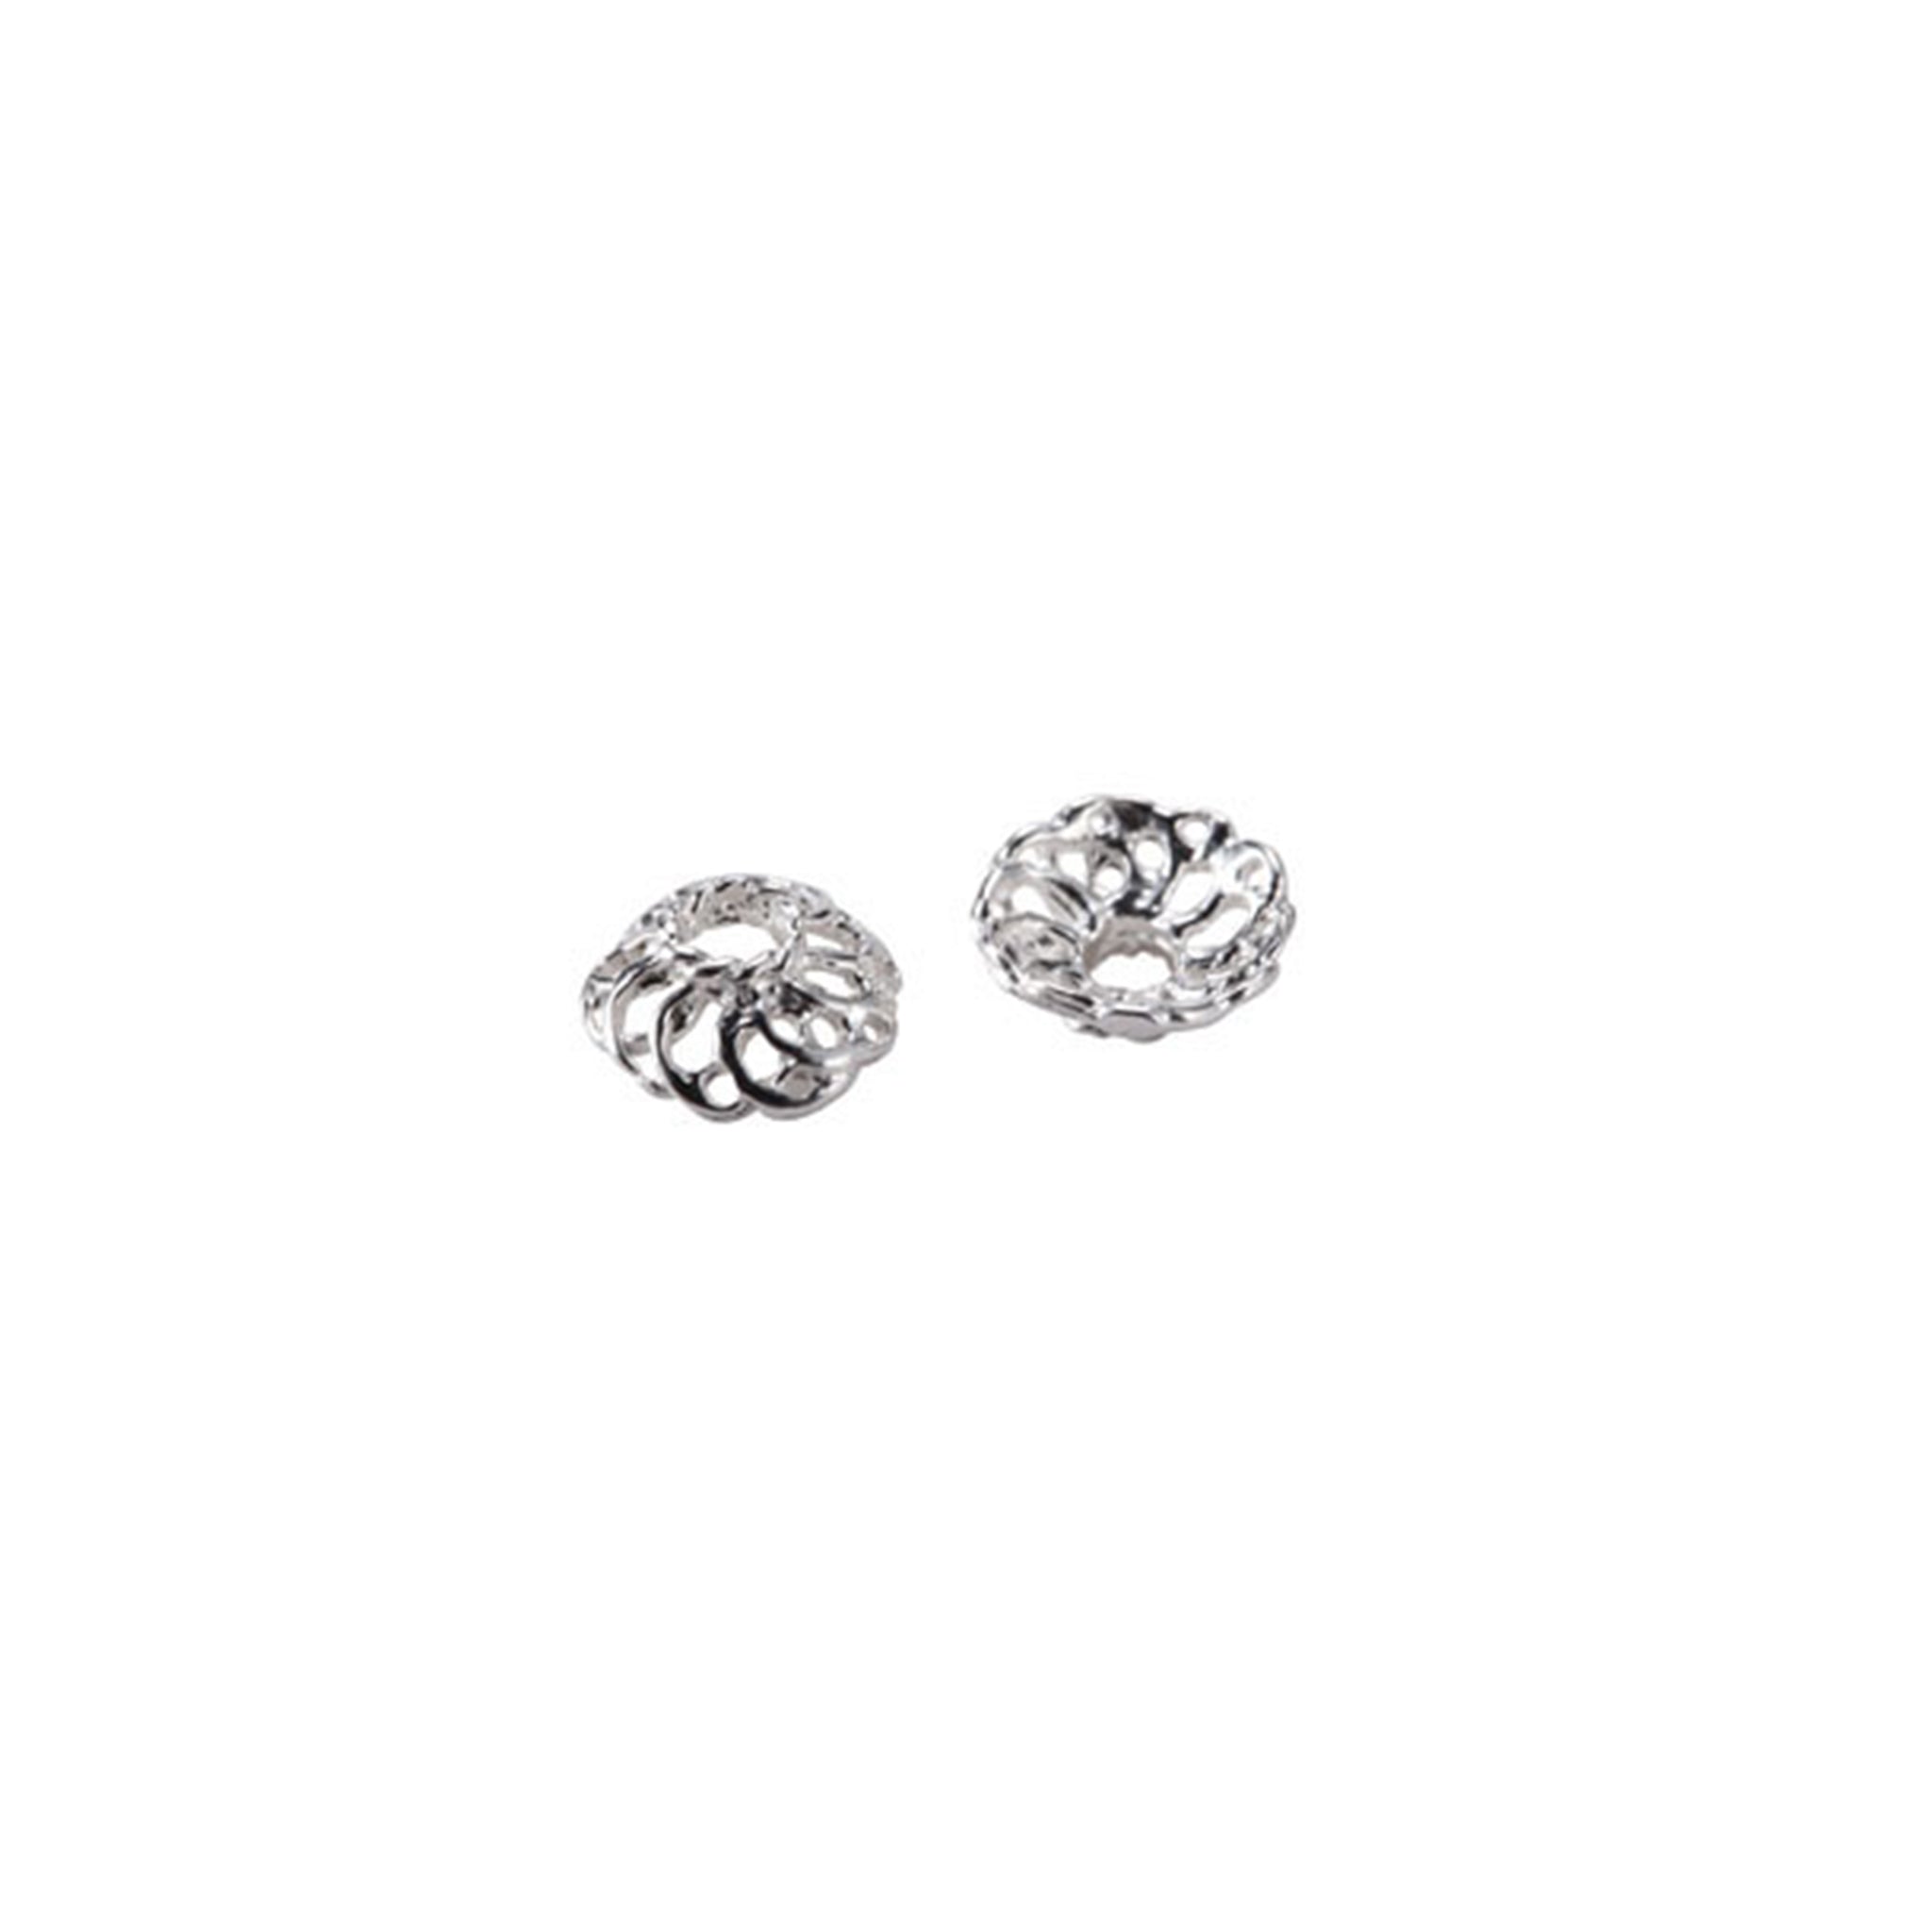 Spiral Scalloped Bead Cap in Sterling Silver 6.8 x2mm